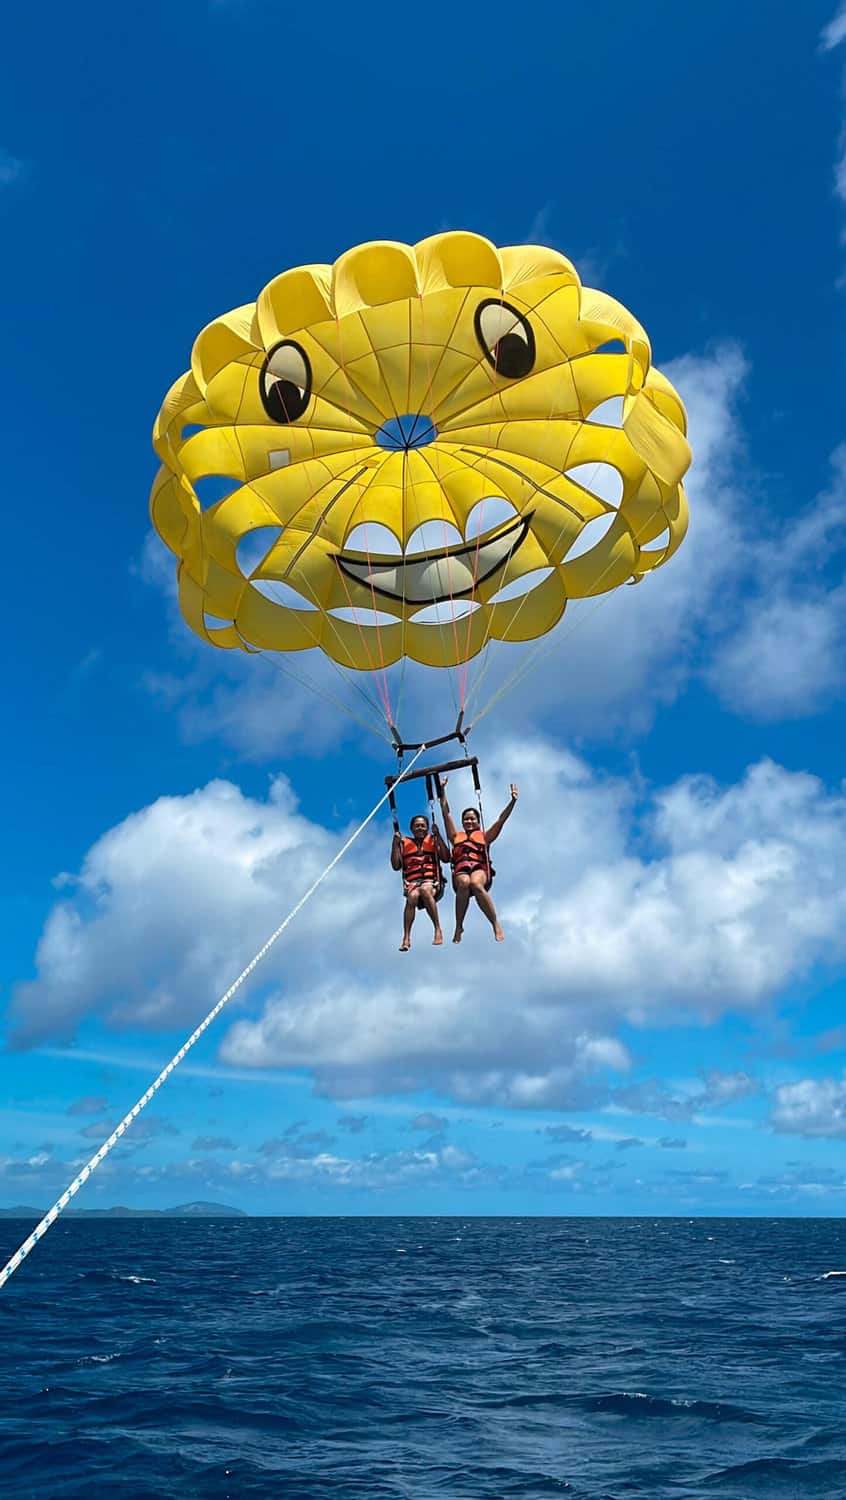 My mothe and I parasailing over the clear blue waters of Boracay.